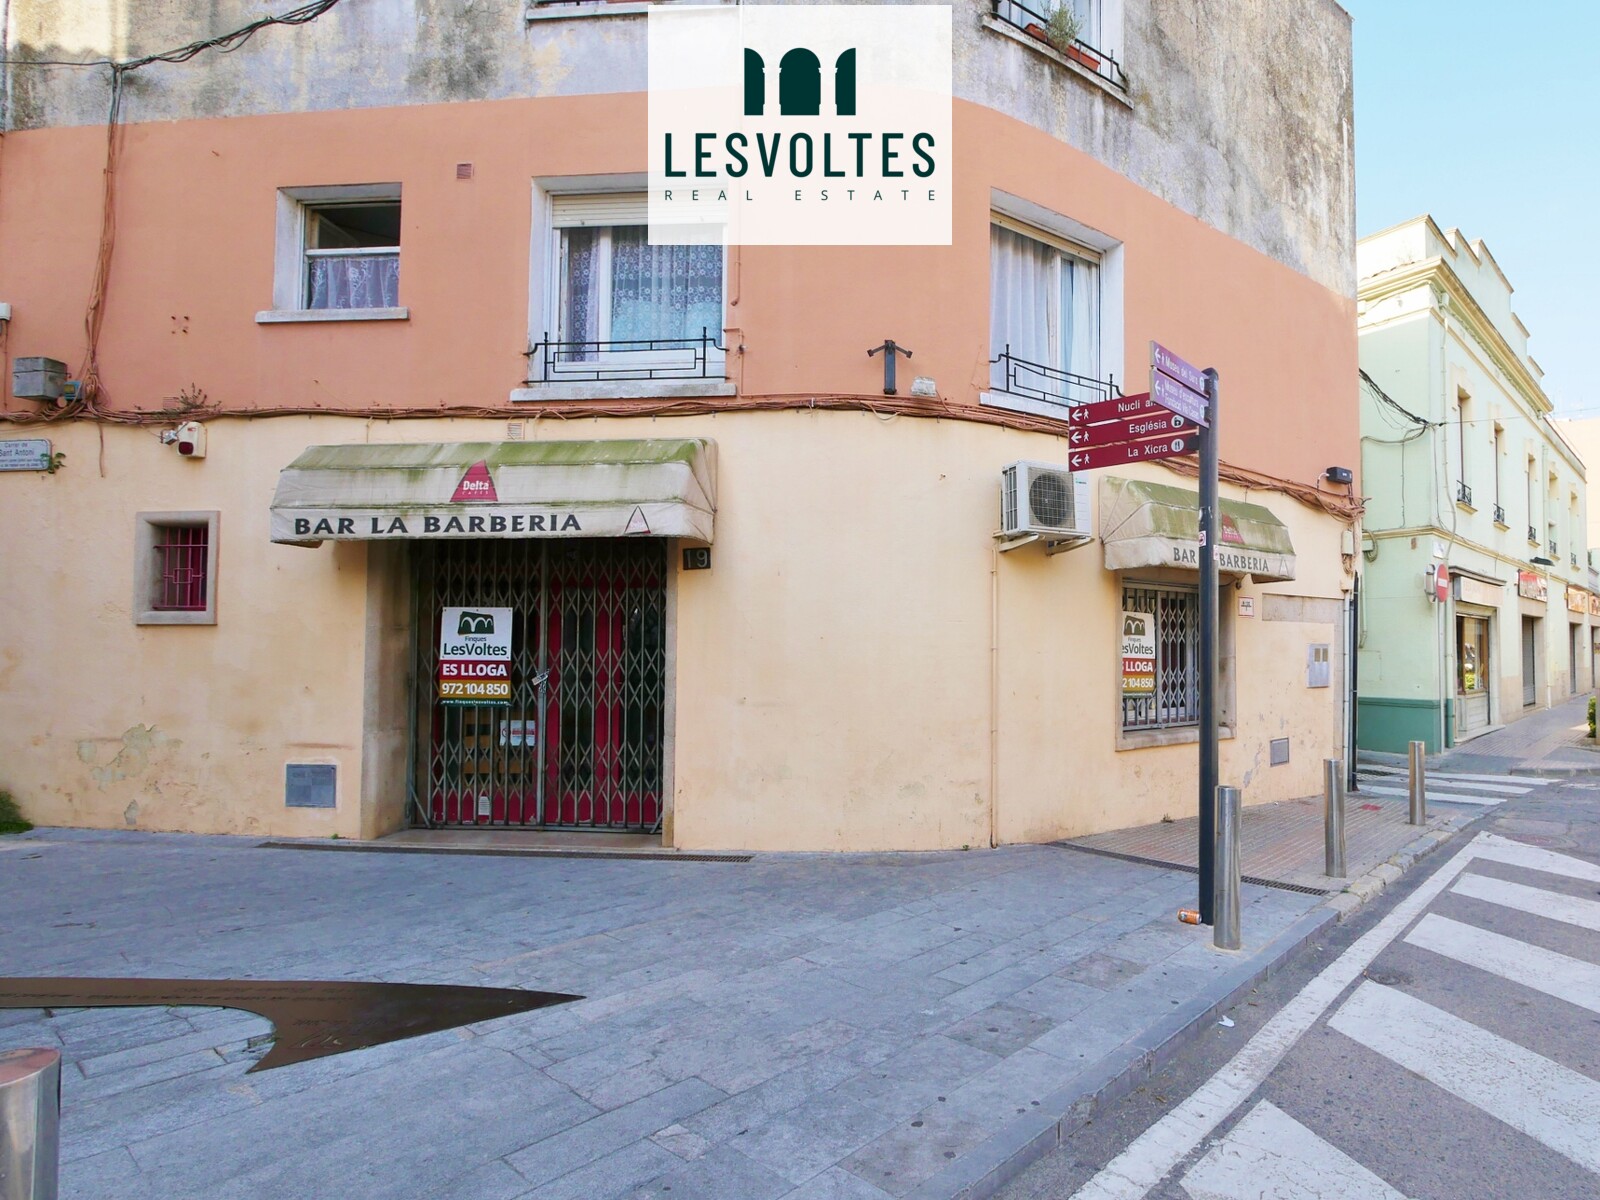 Bar Restaurant for rent in an unbeatable location right in the pedestrian center of Palafrugell.